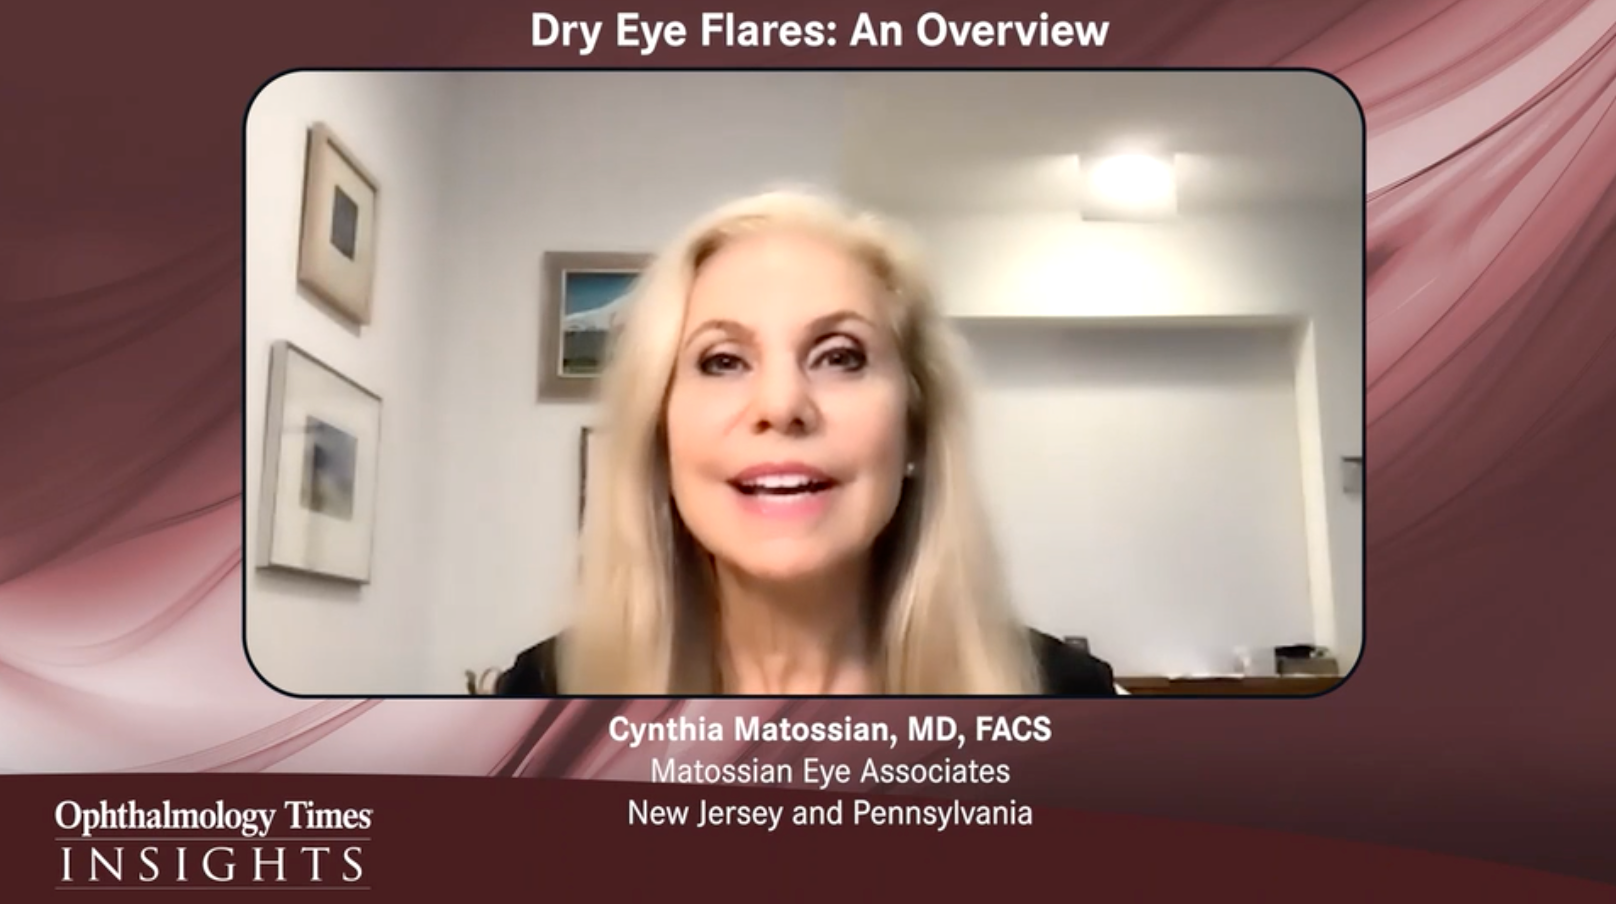 Cynthia Matossian, MD, discusses DED flares, and their detection and management, in an interview for Ophthalmology Times®/Optometry Times.®